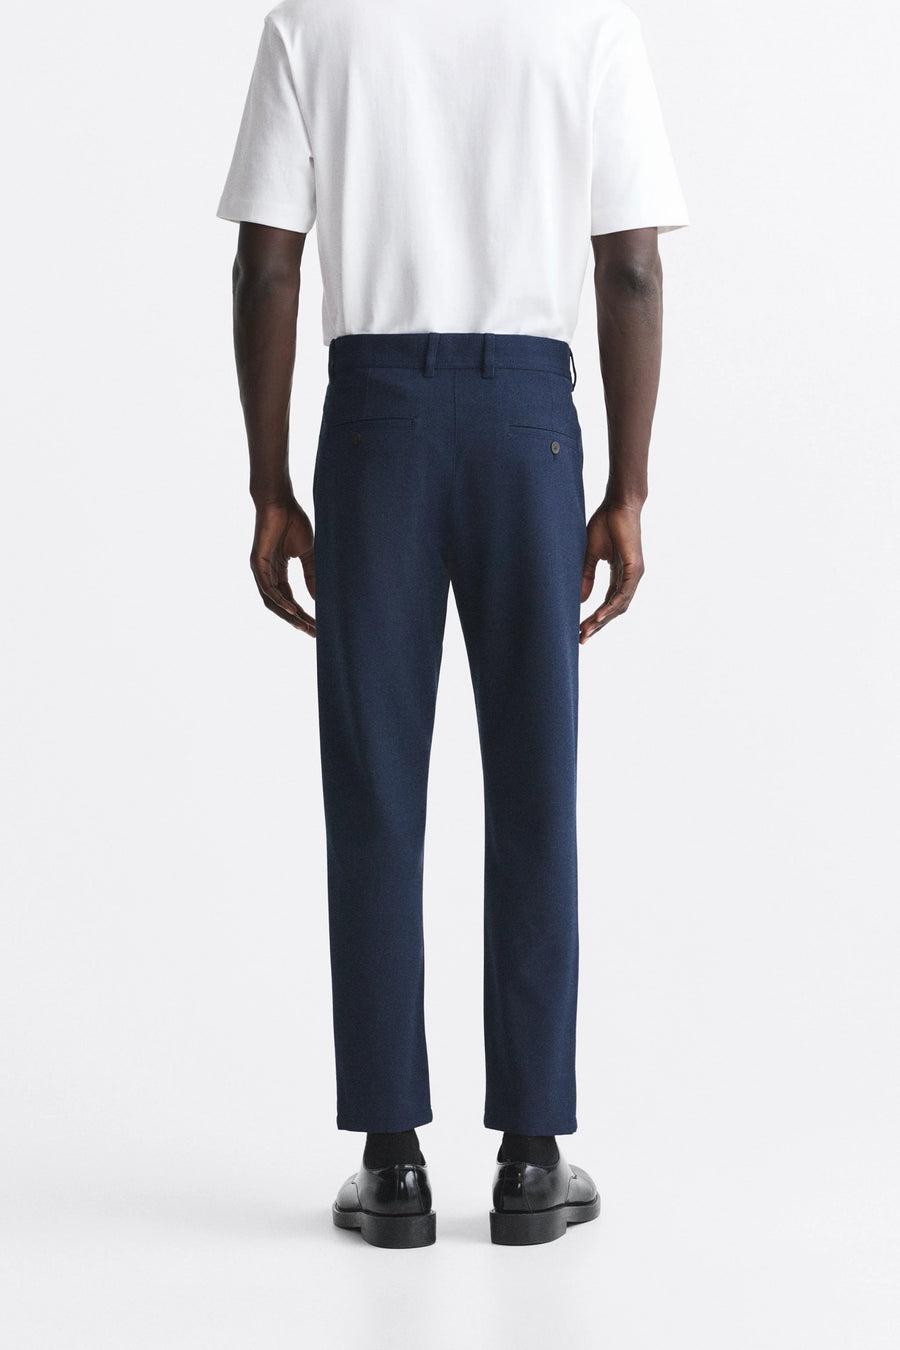 TEXTURED COMFORT TROUSERS 015